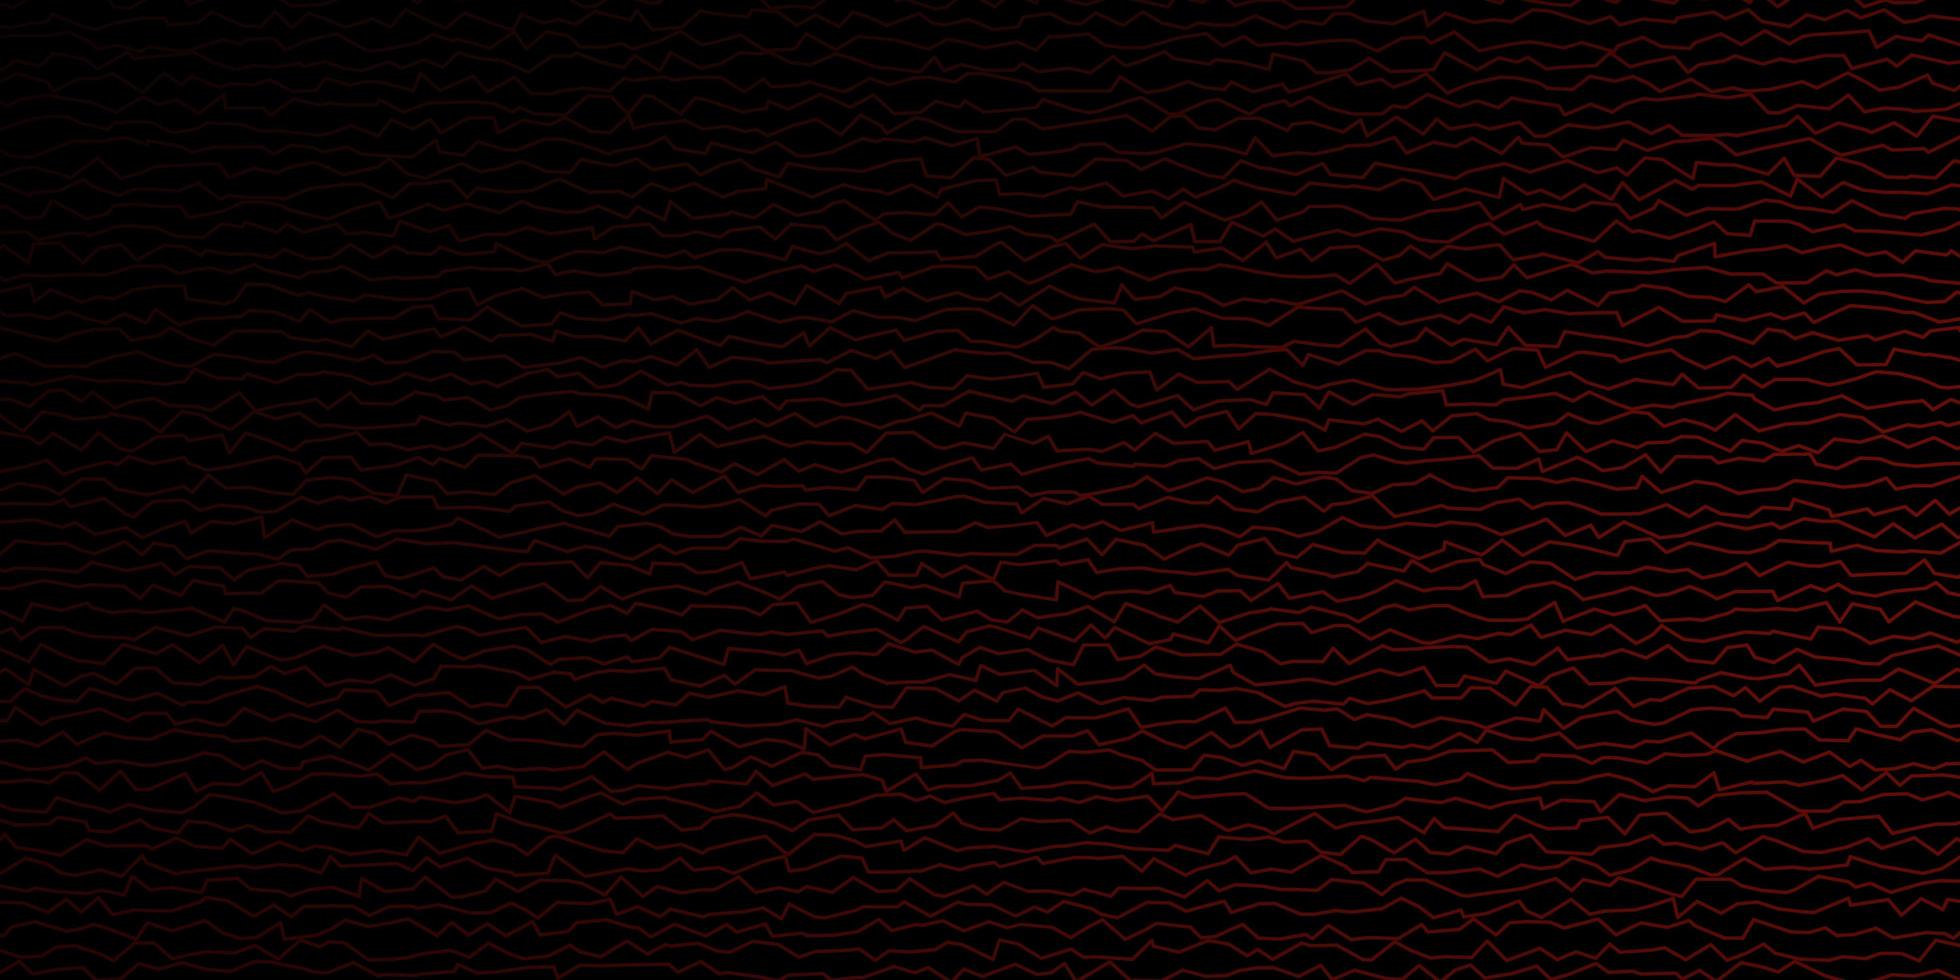 Dark Red vector layout with wry lines.